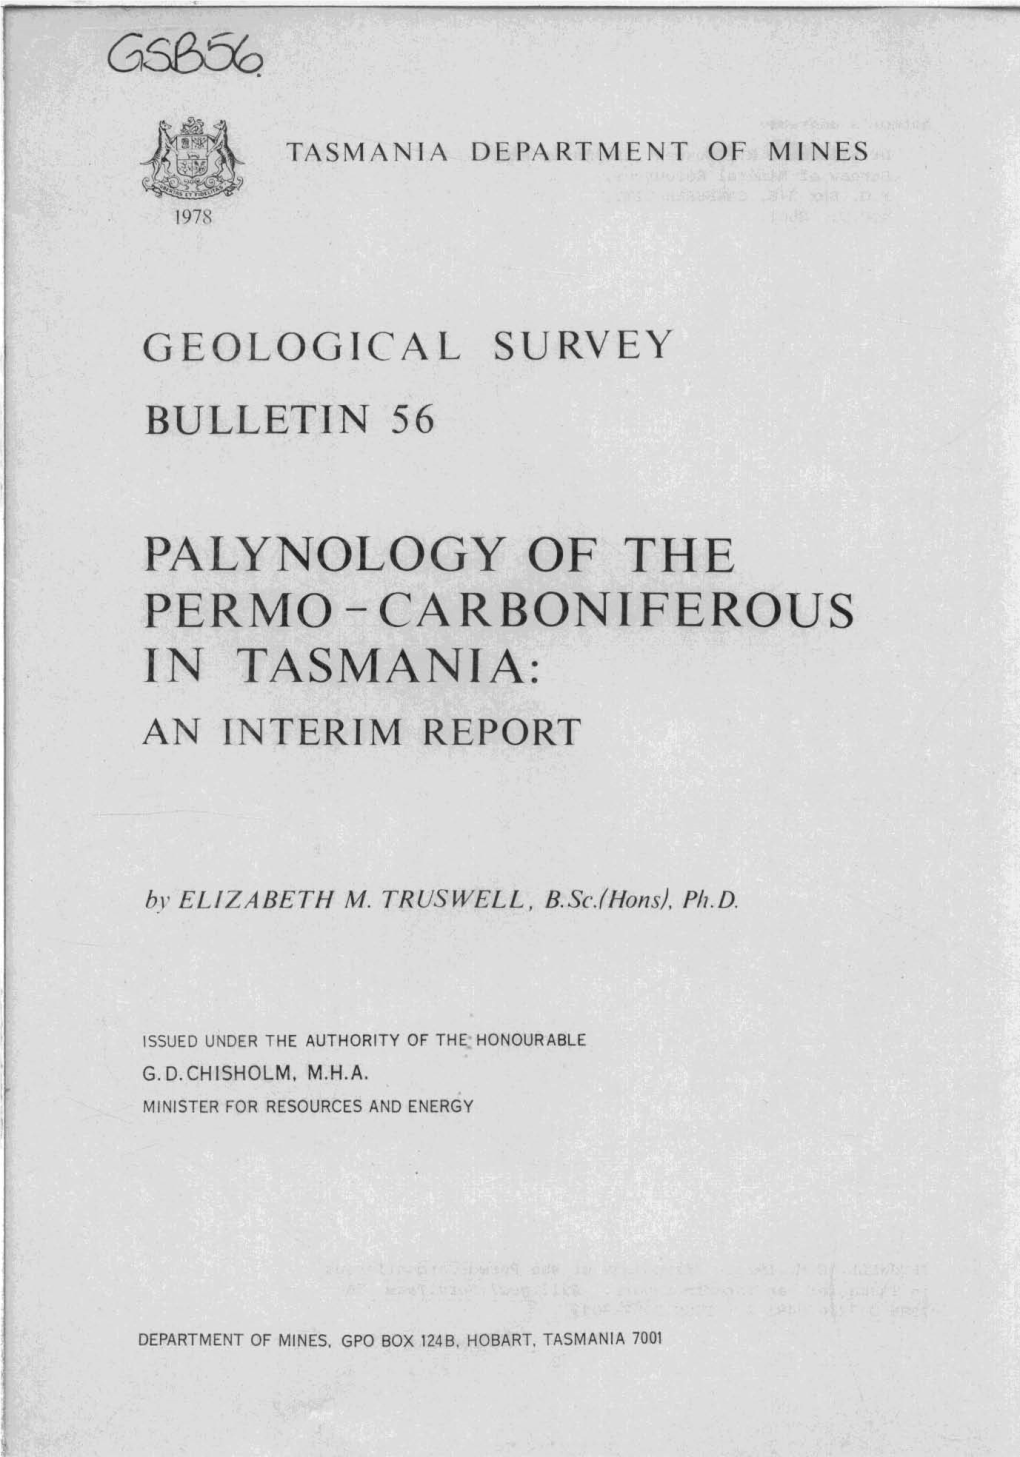 Palynology of the Permo - Carboniferous in Tasmania: an Interim Report